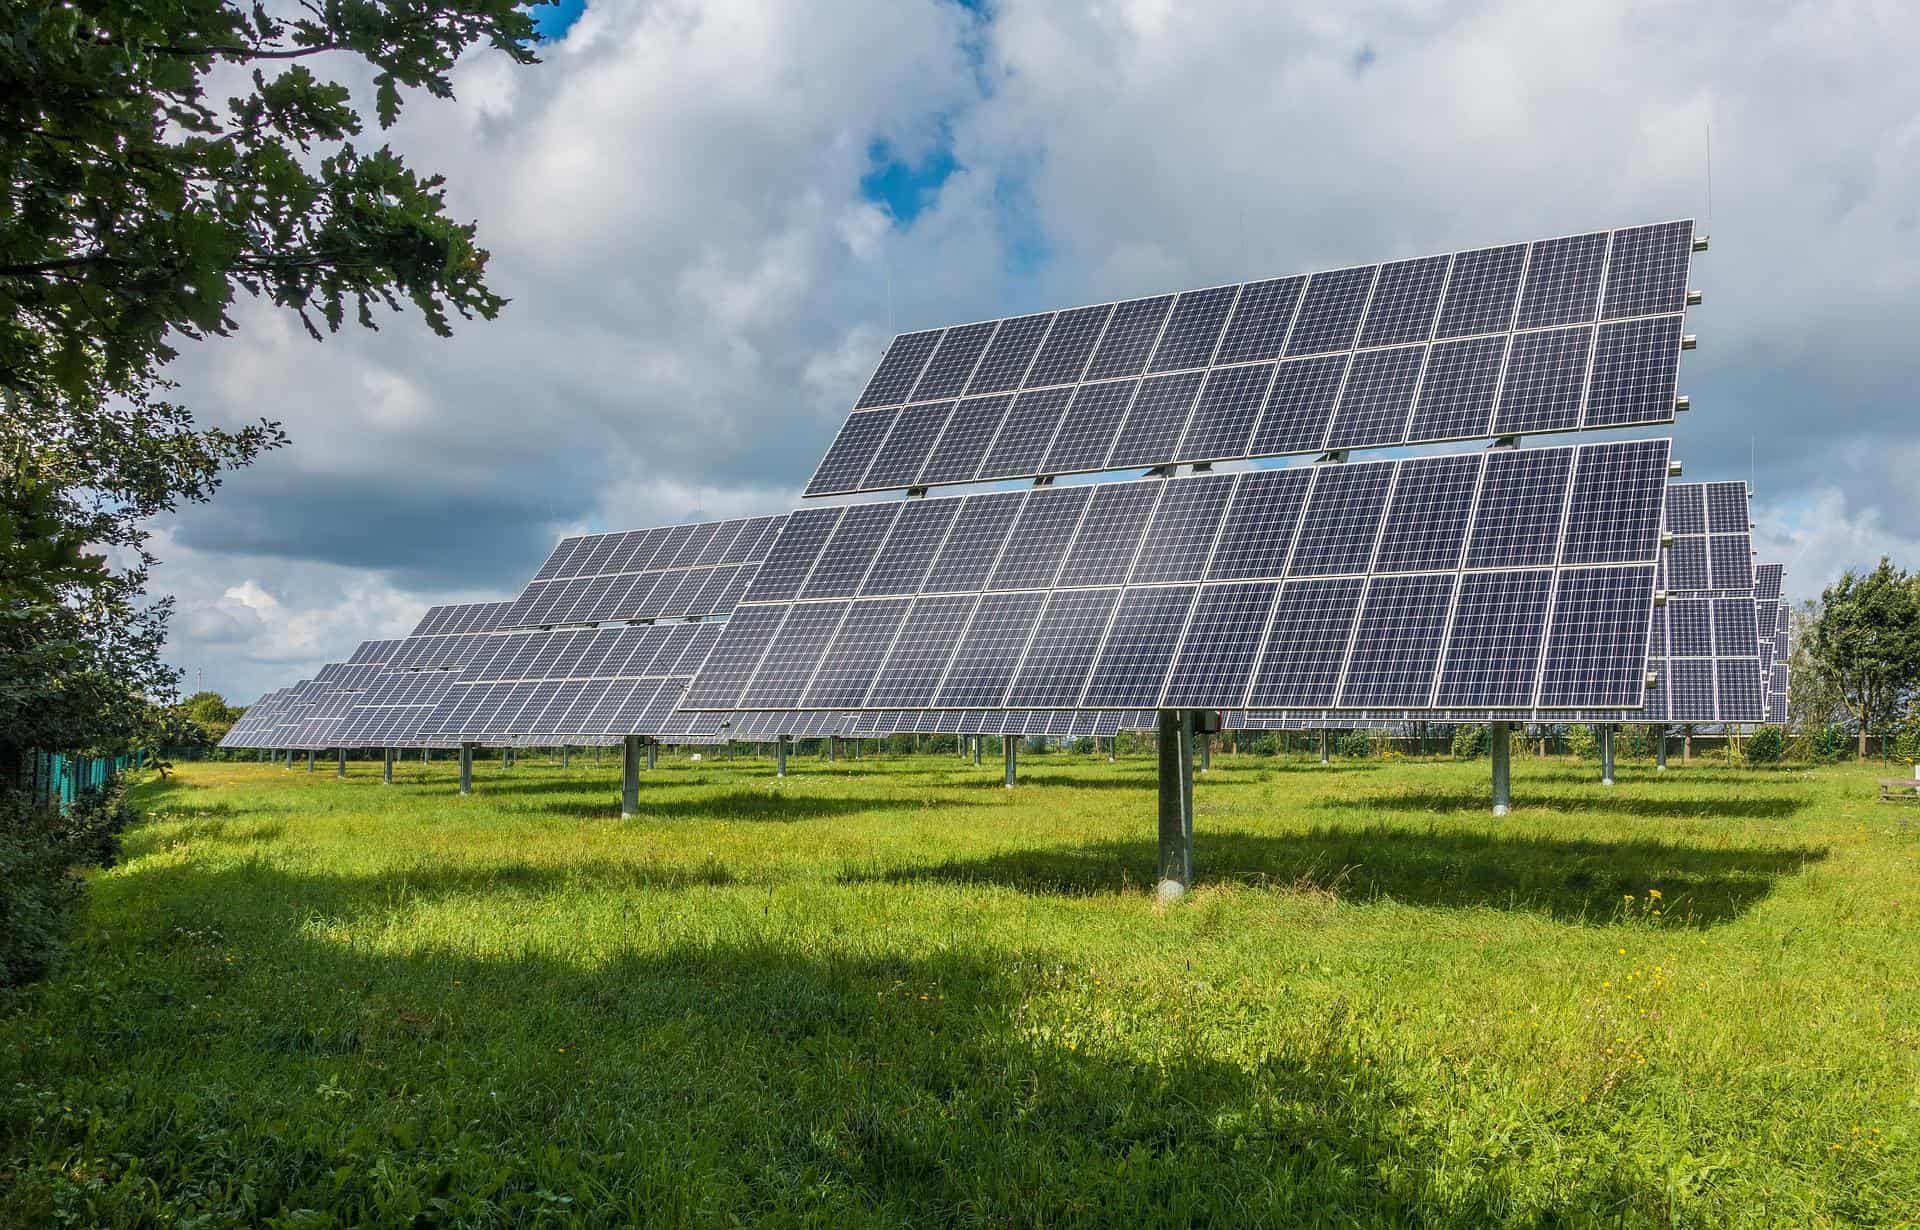 A solar panel array installed in a field pictured during a bright and sunny day.